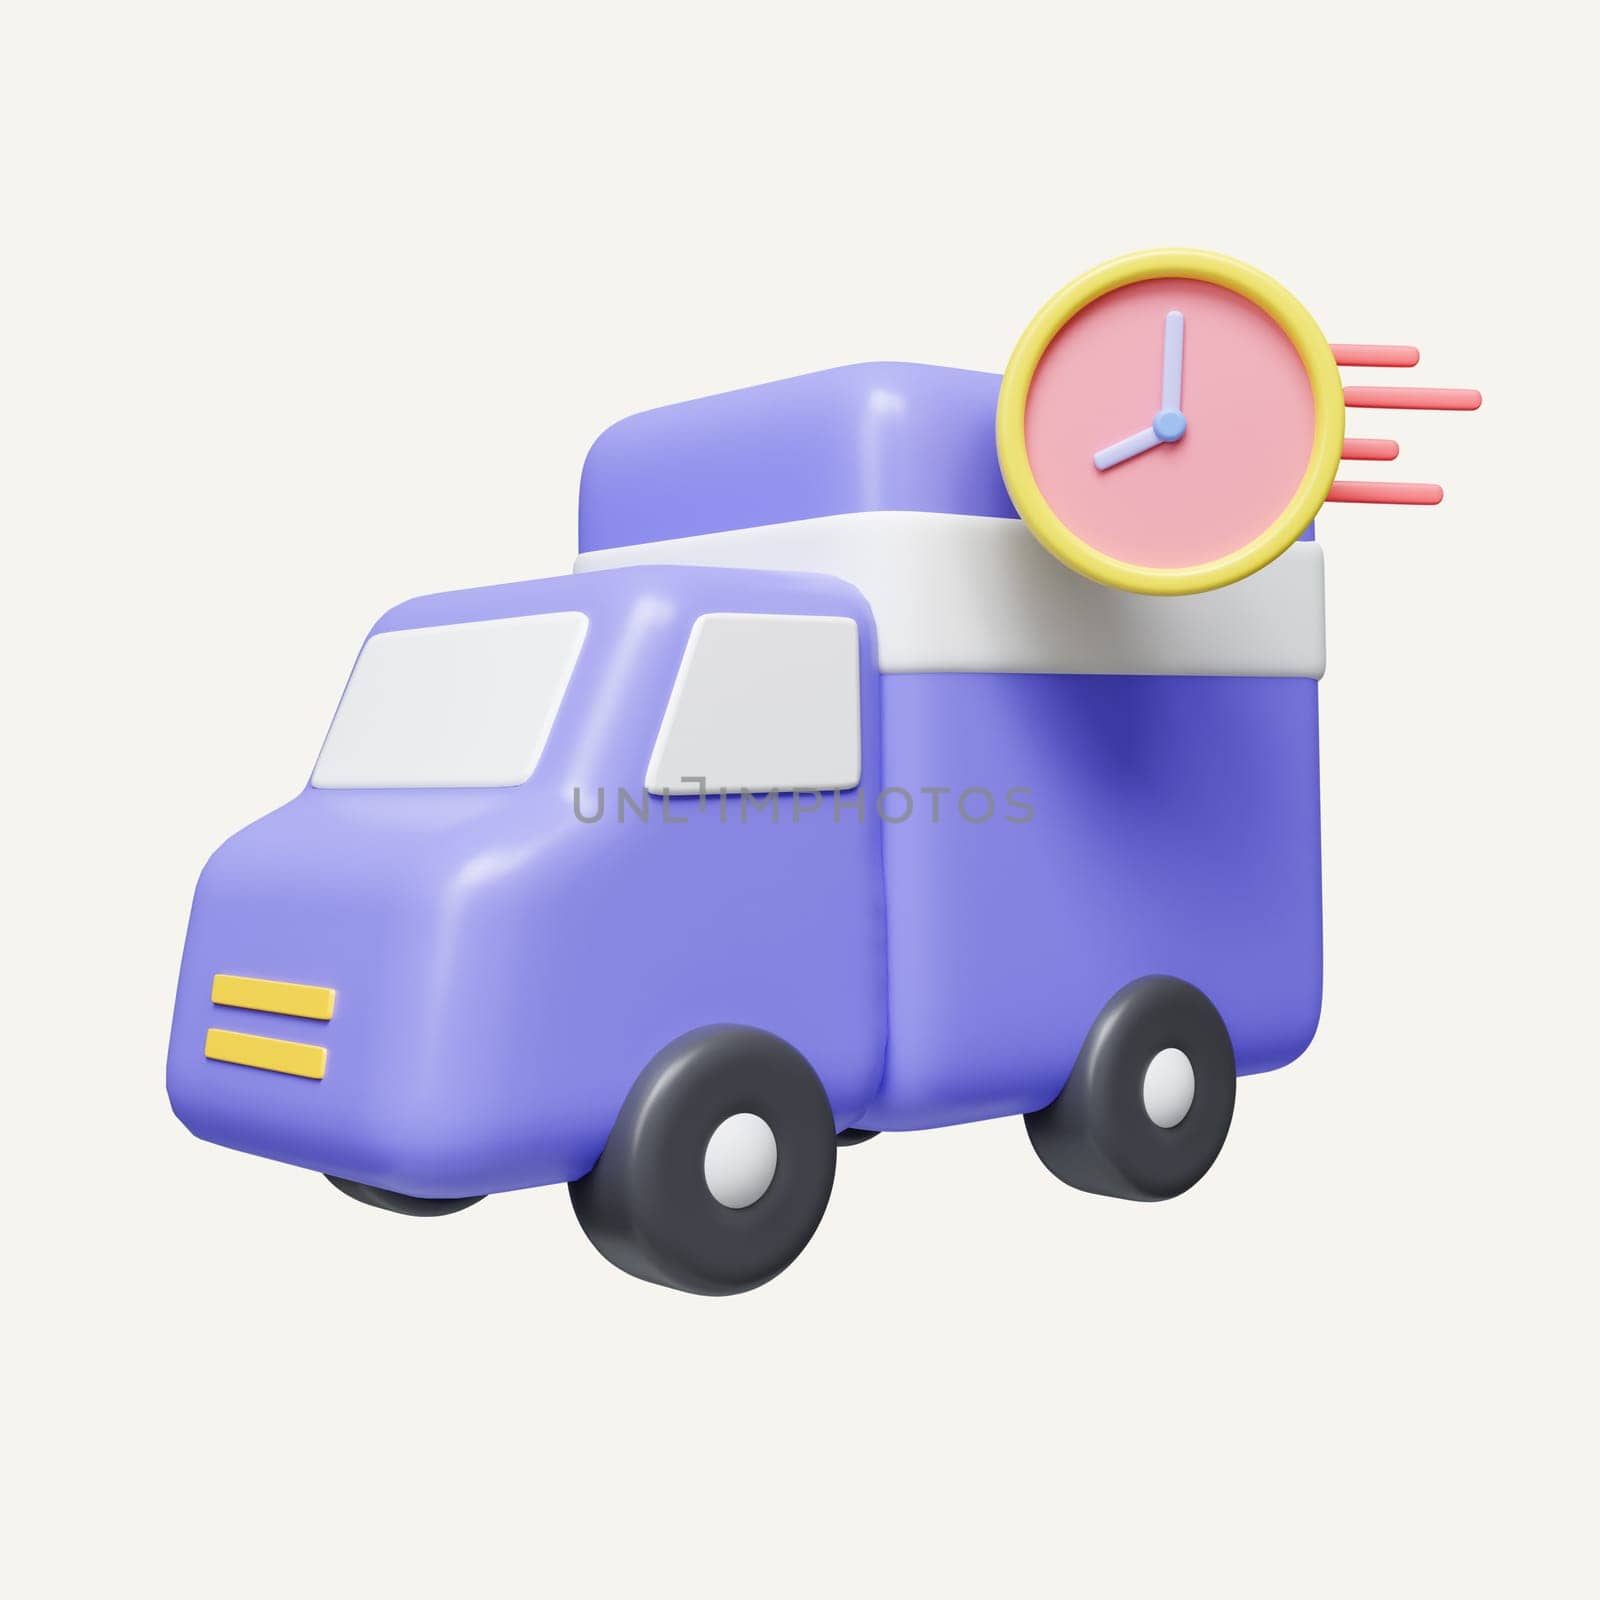 3d fast delivery concept. delivery truck with clock icon and fast icon. quick delivery service. icon isolated on white background. 3d rendering illustration. Clipping path. by meepiangraphic